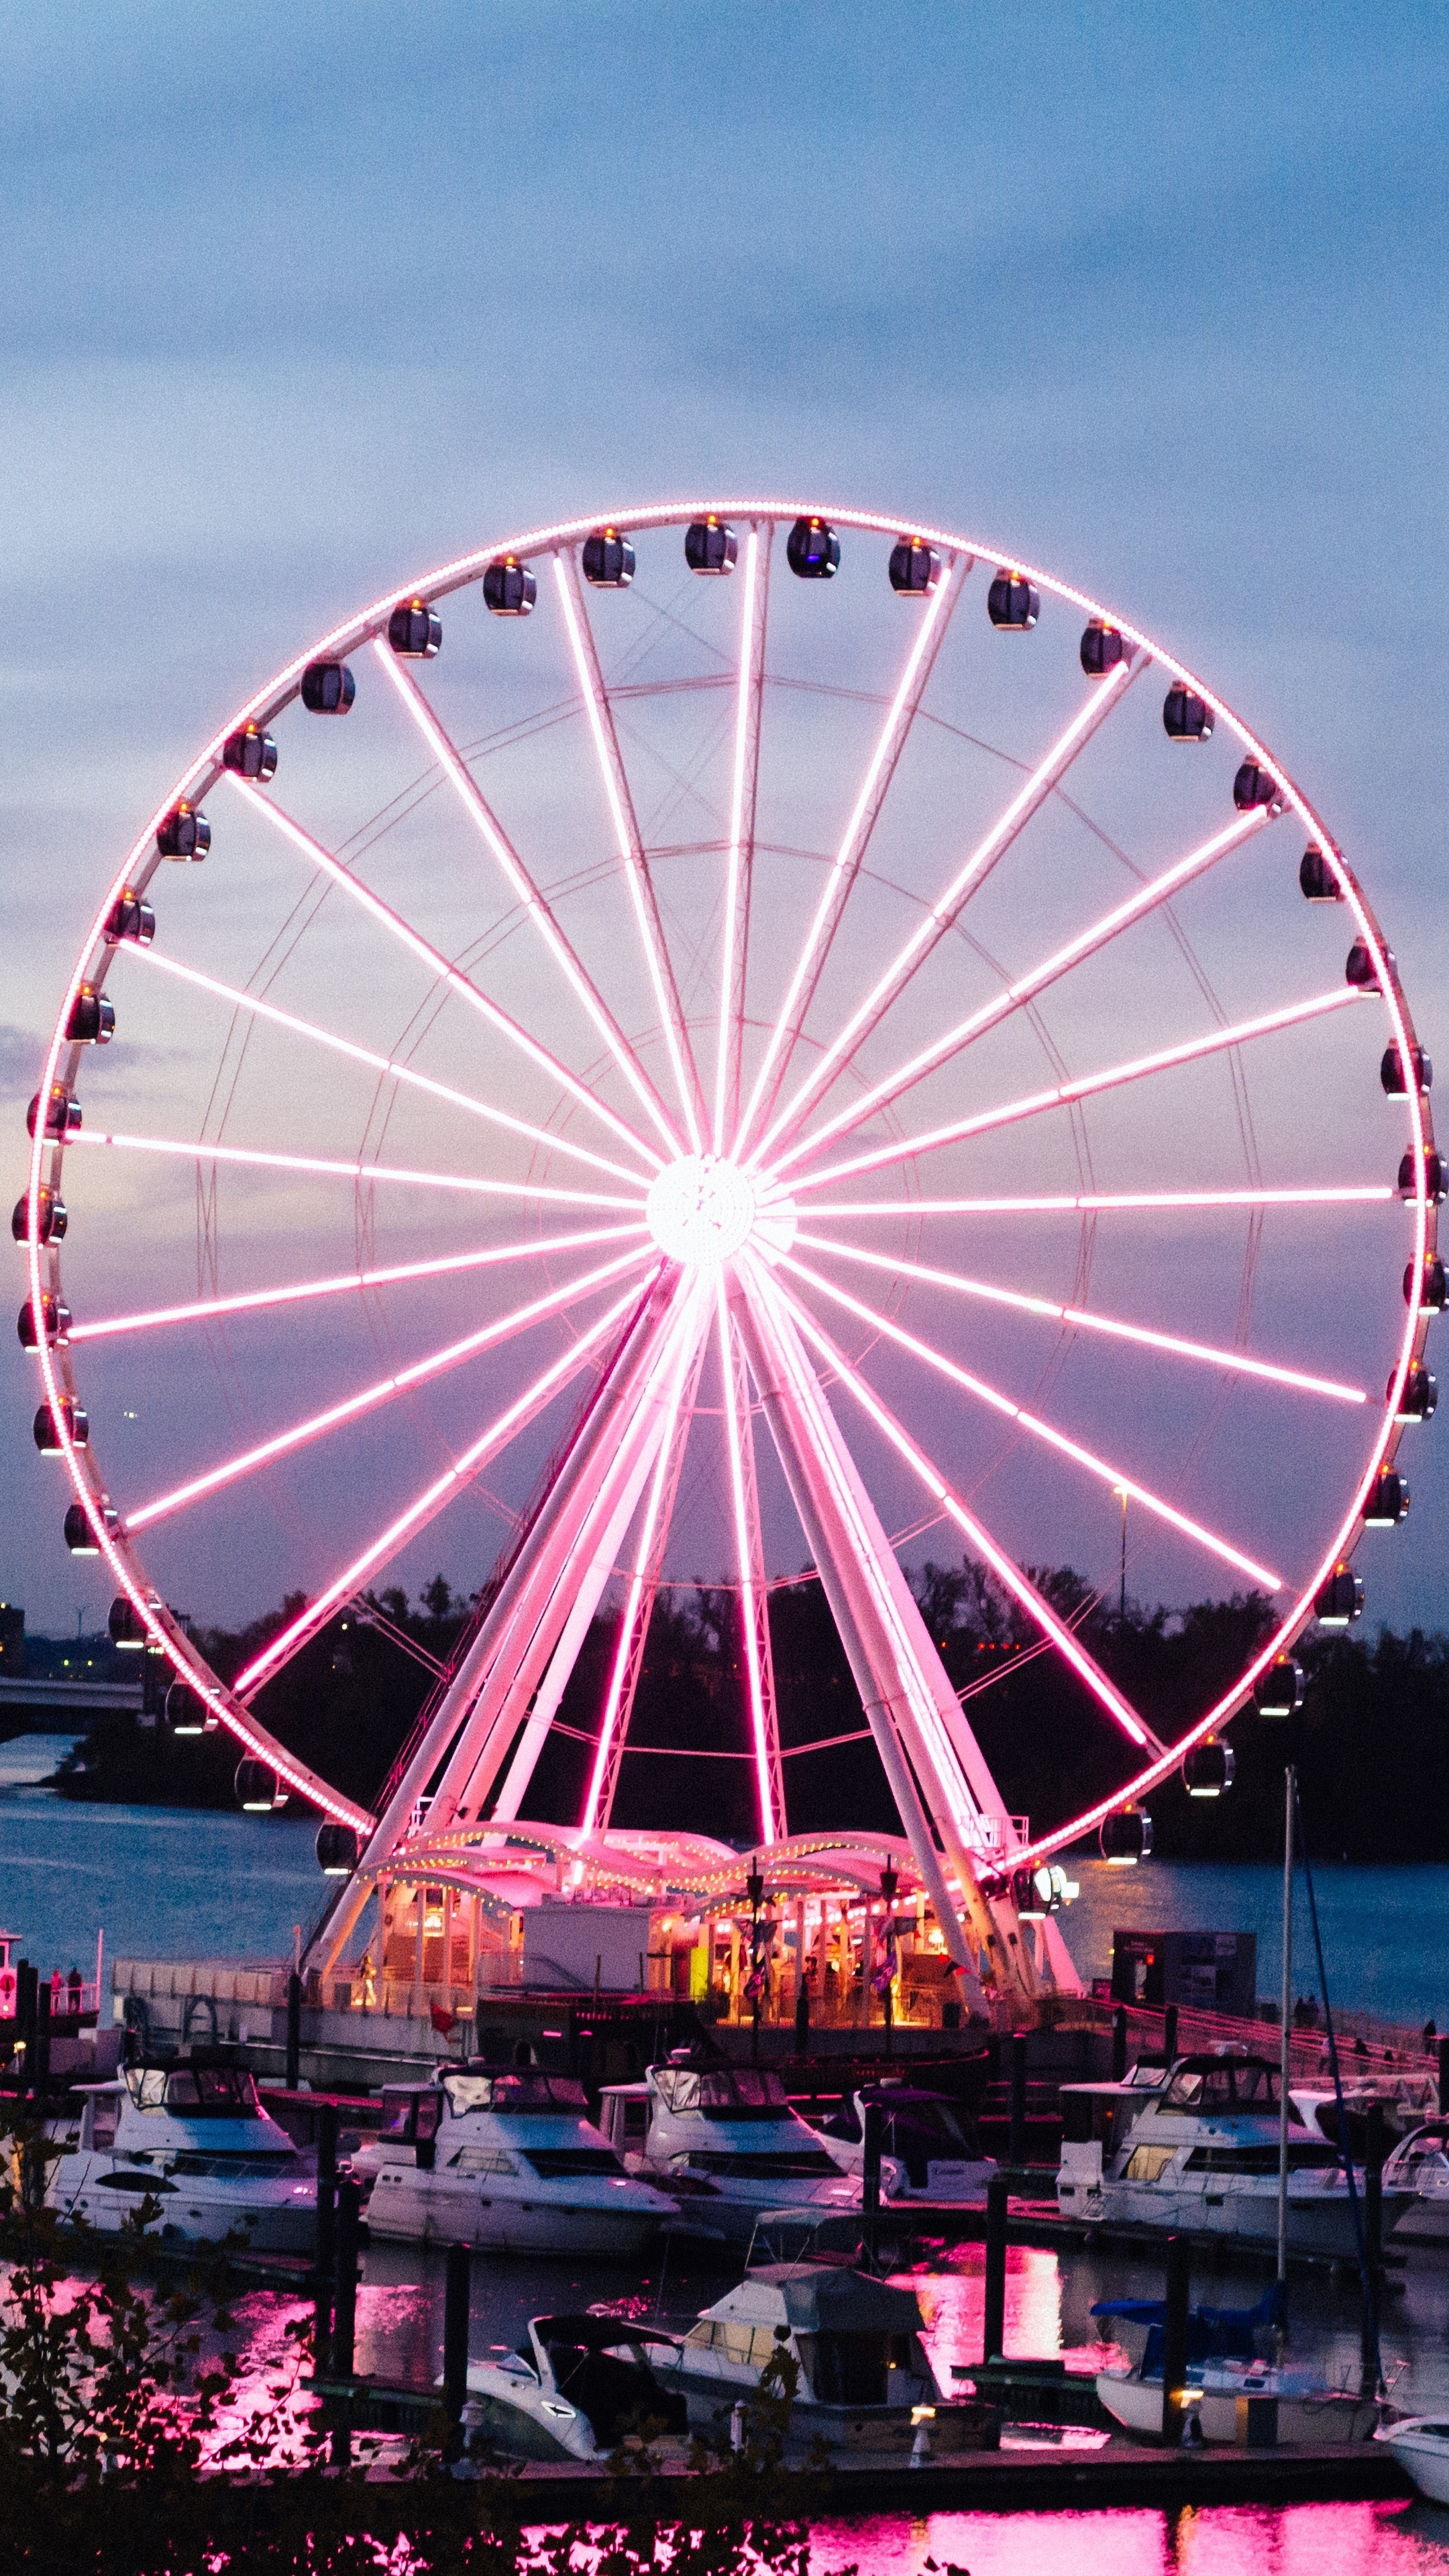 Amusement Park: The Capital Wheel, Location with different themes and rides. 2160x3840 4K Wallpaper.